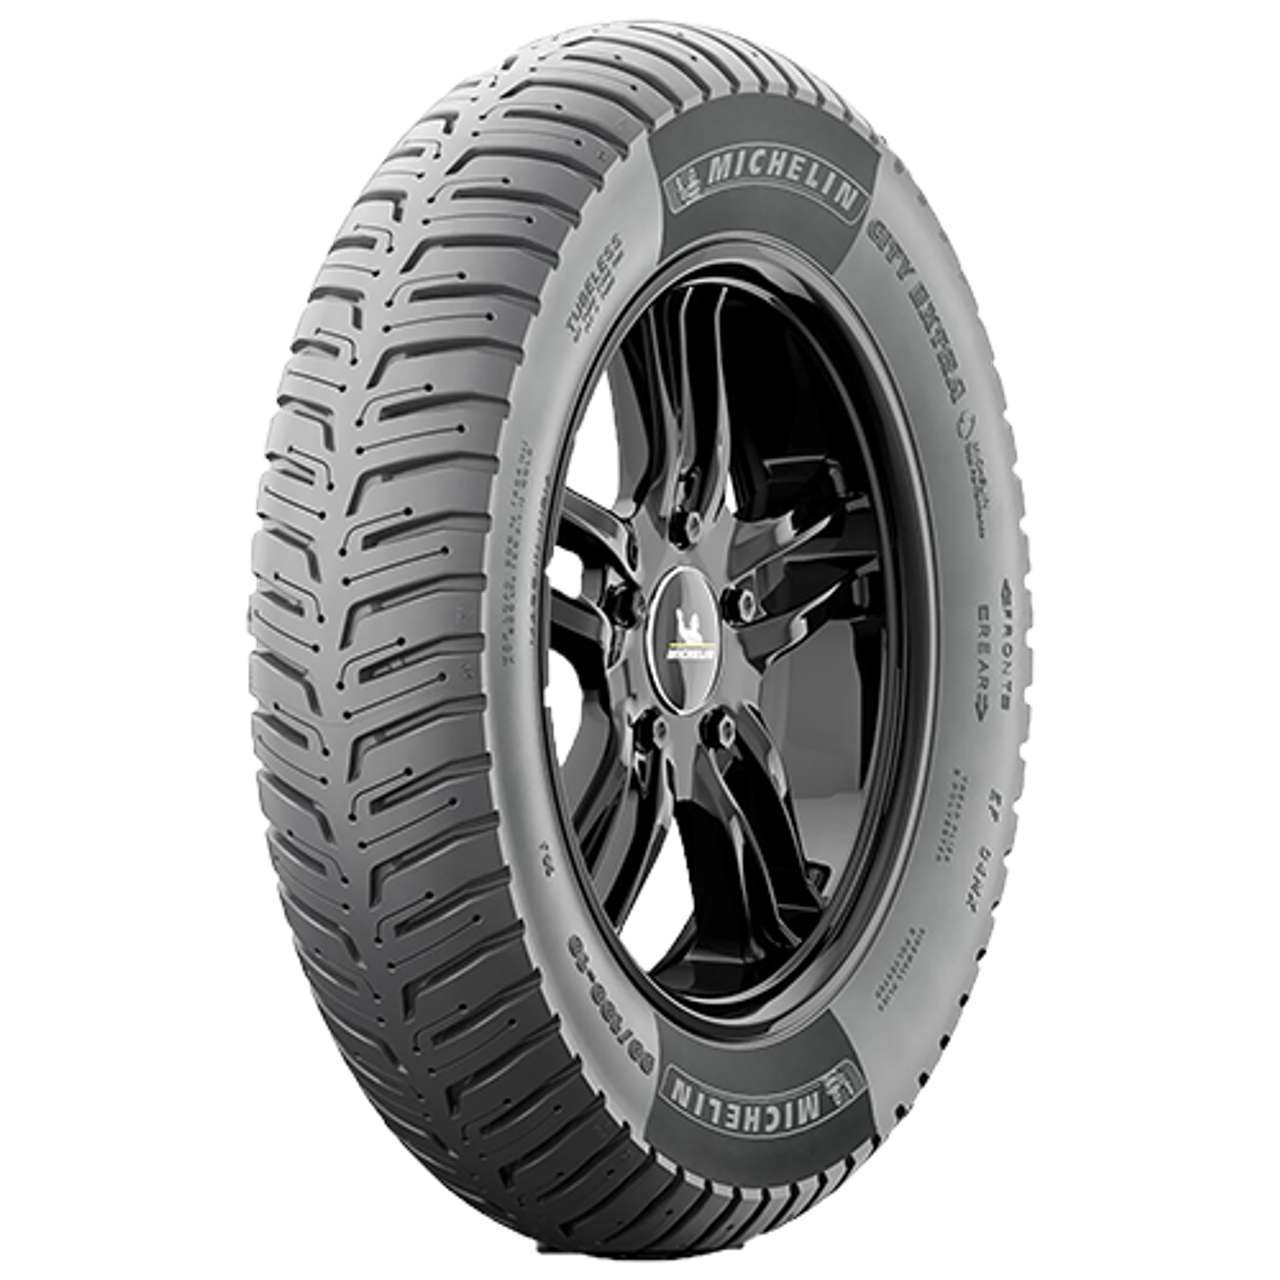 MICHELIN CITY EXTRA 90/90 - 18 M/C XL TL 57S FRONT/REAR